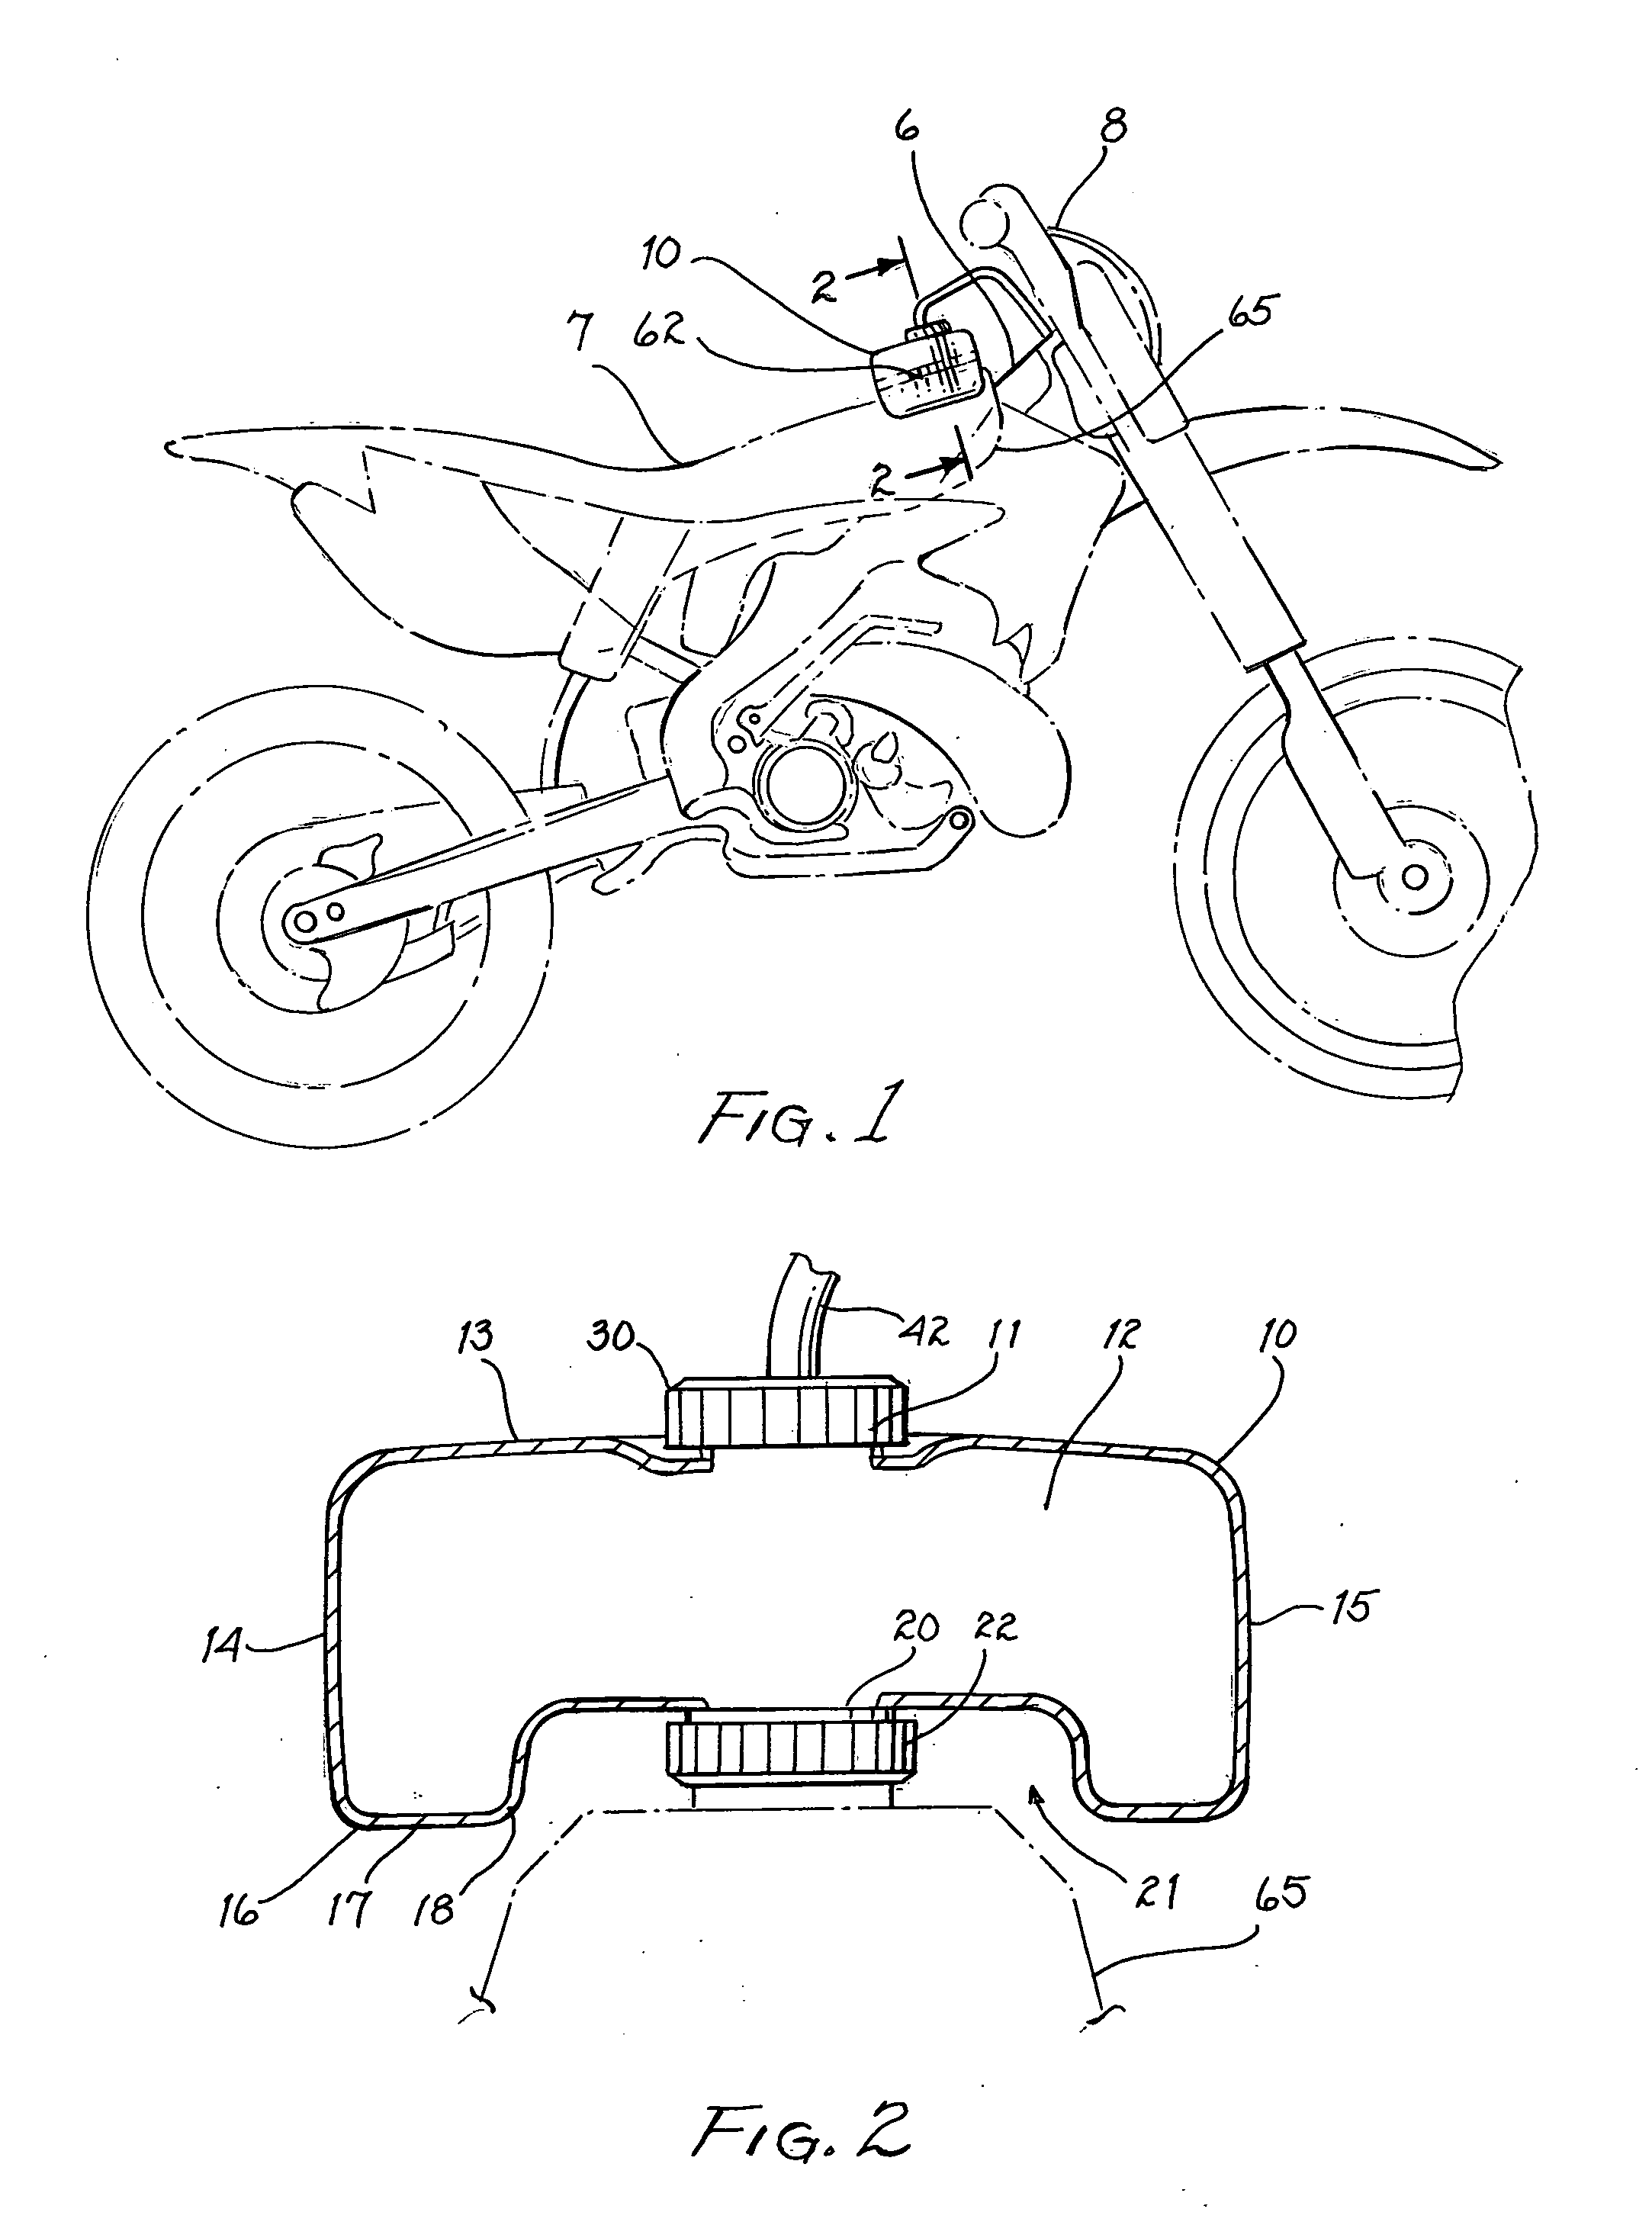 Removable auxiliary area fuel tank for motorcycles